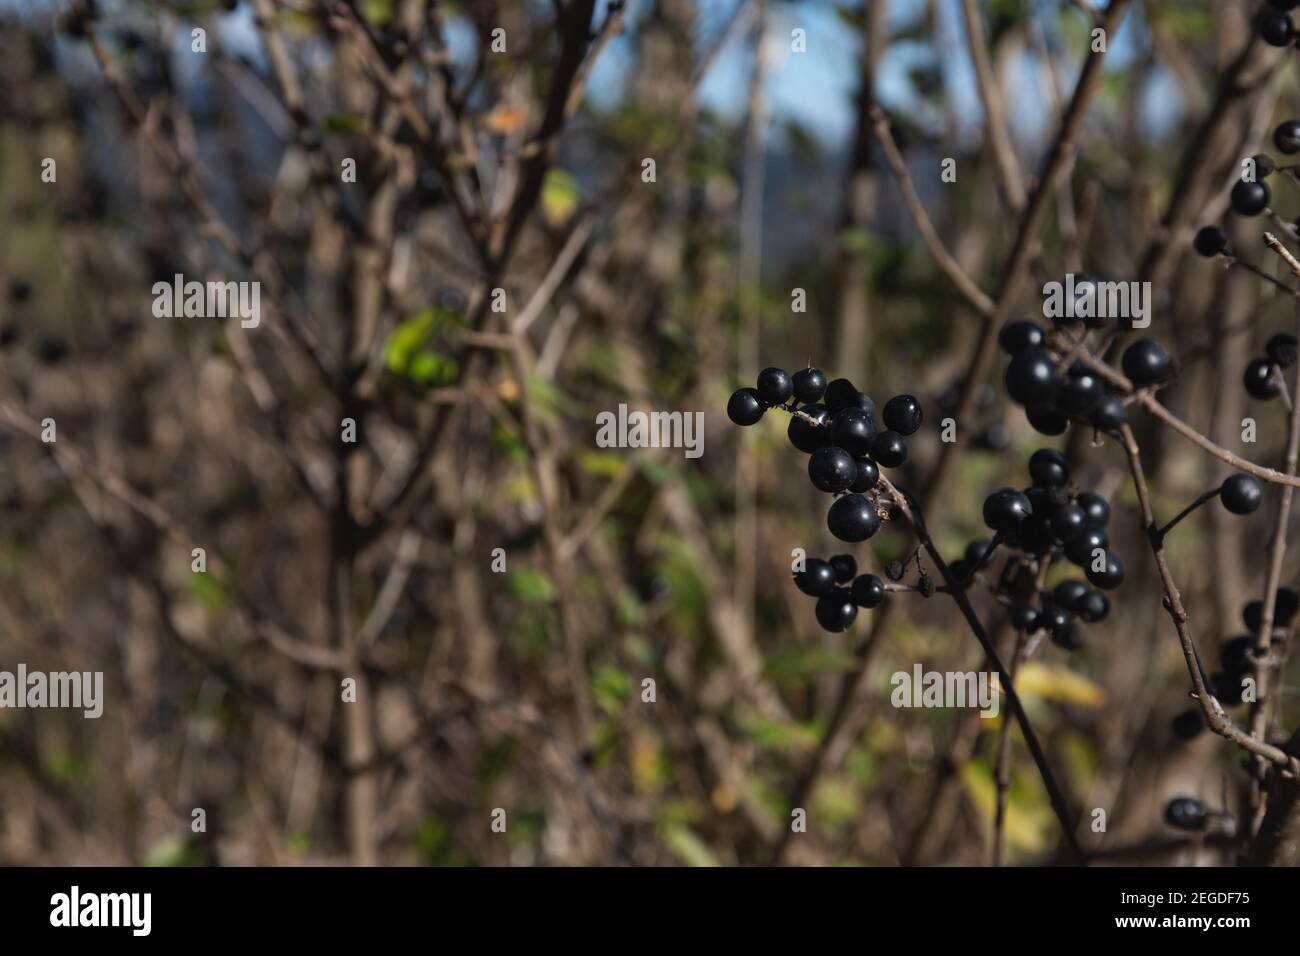 Food berry. Bird cherry a small cherry tree or wild bush, with bitter black fruits that are eaten by birds. Outside park on a sunny day in nature Stock Photo